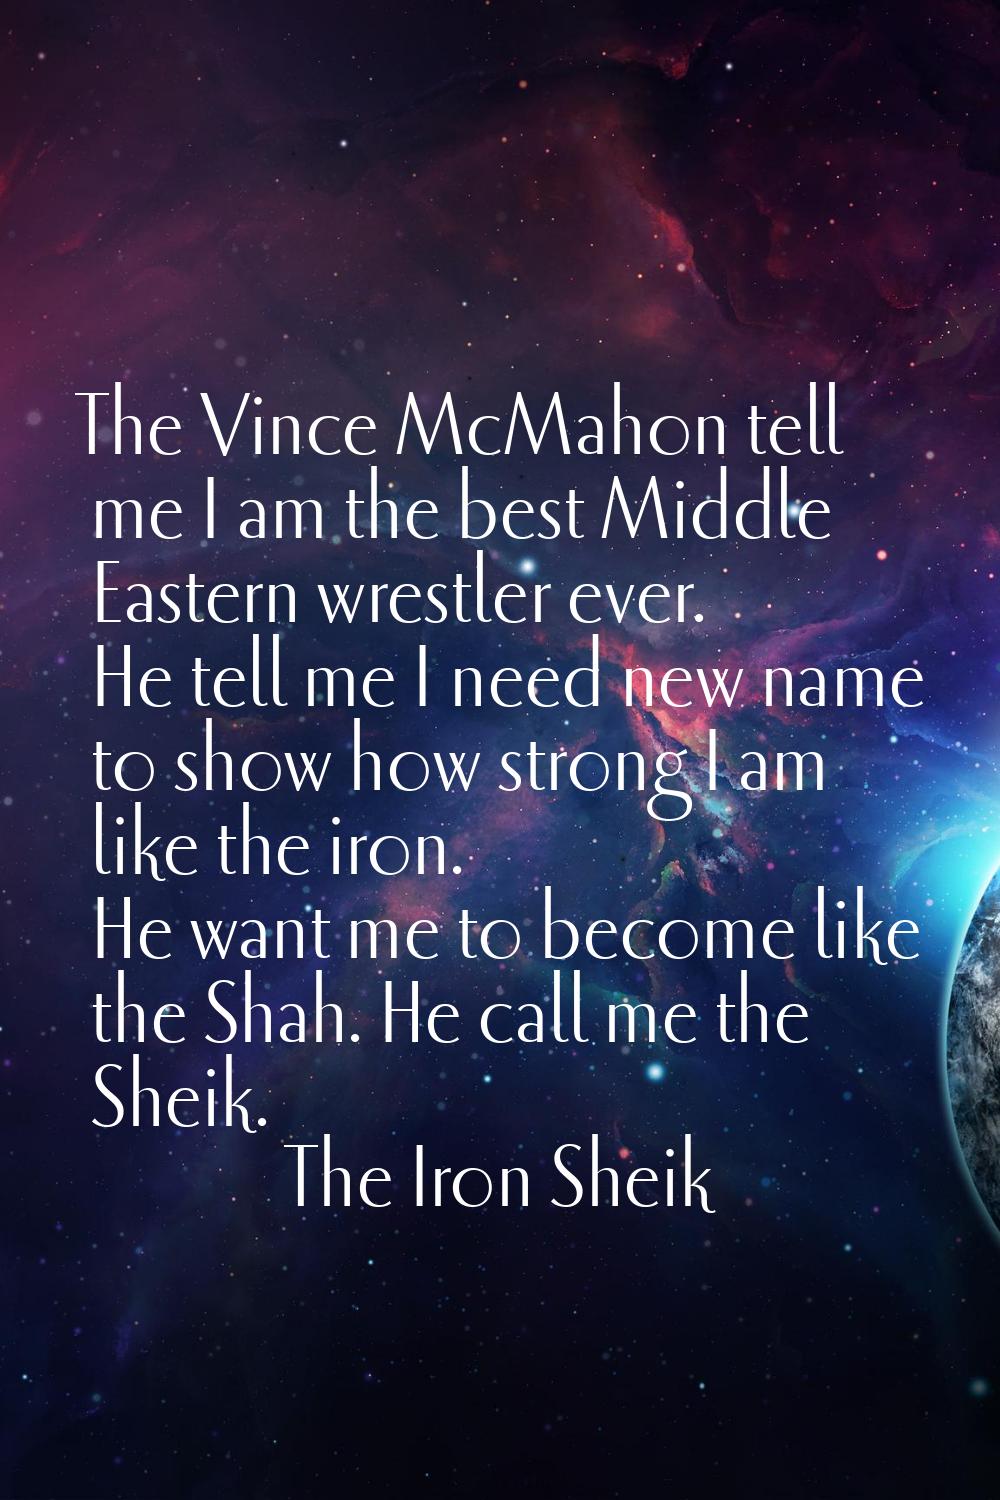 The Vince McMahon tell me I am the best Middle Eastern wrestler ever. He tell me I need new name to